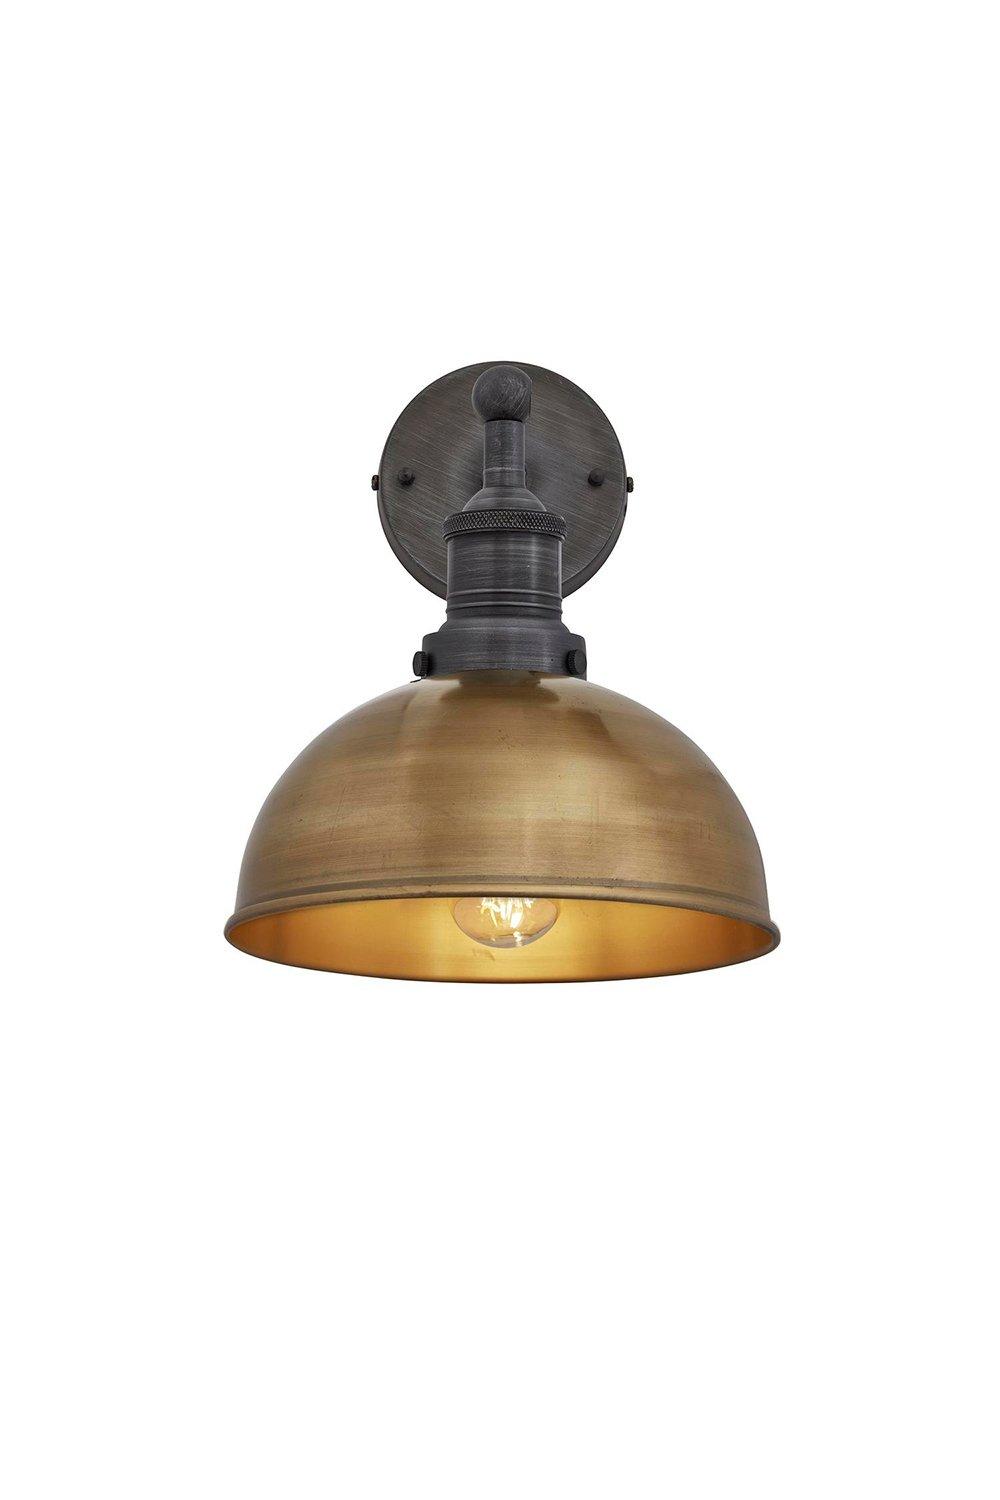 Brooklyn Dome Wall Light, 8 Inch, Brass, Pewter Holder